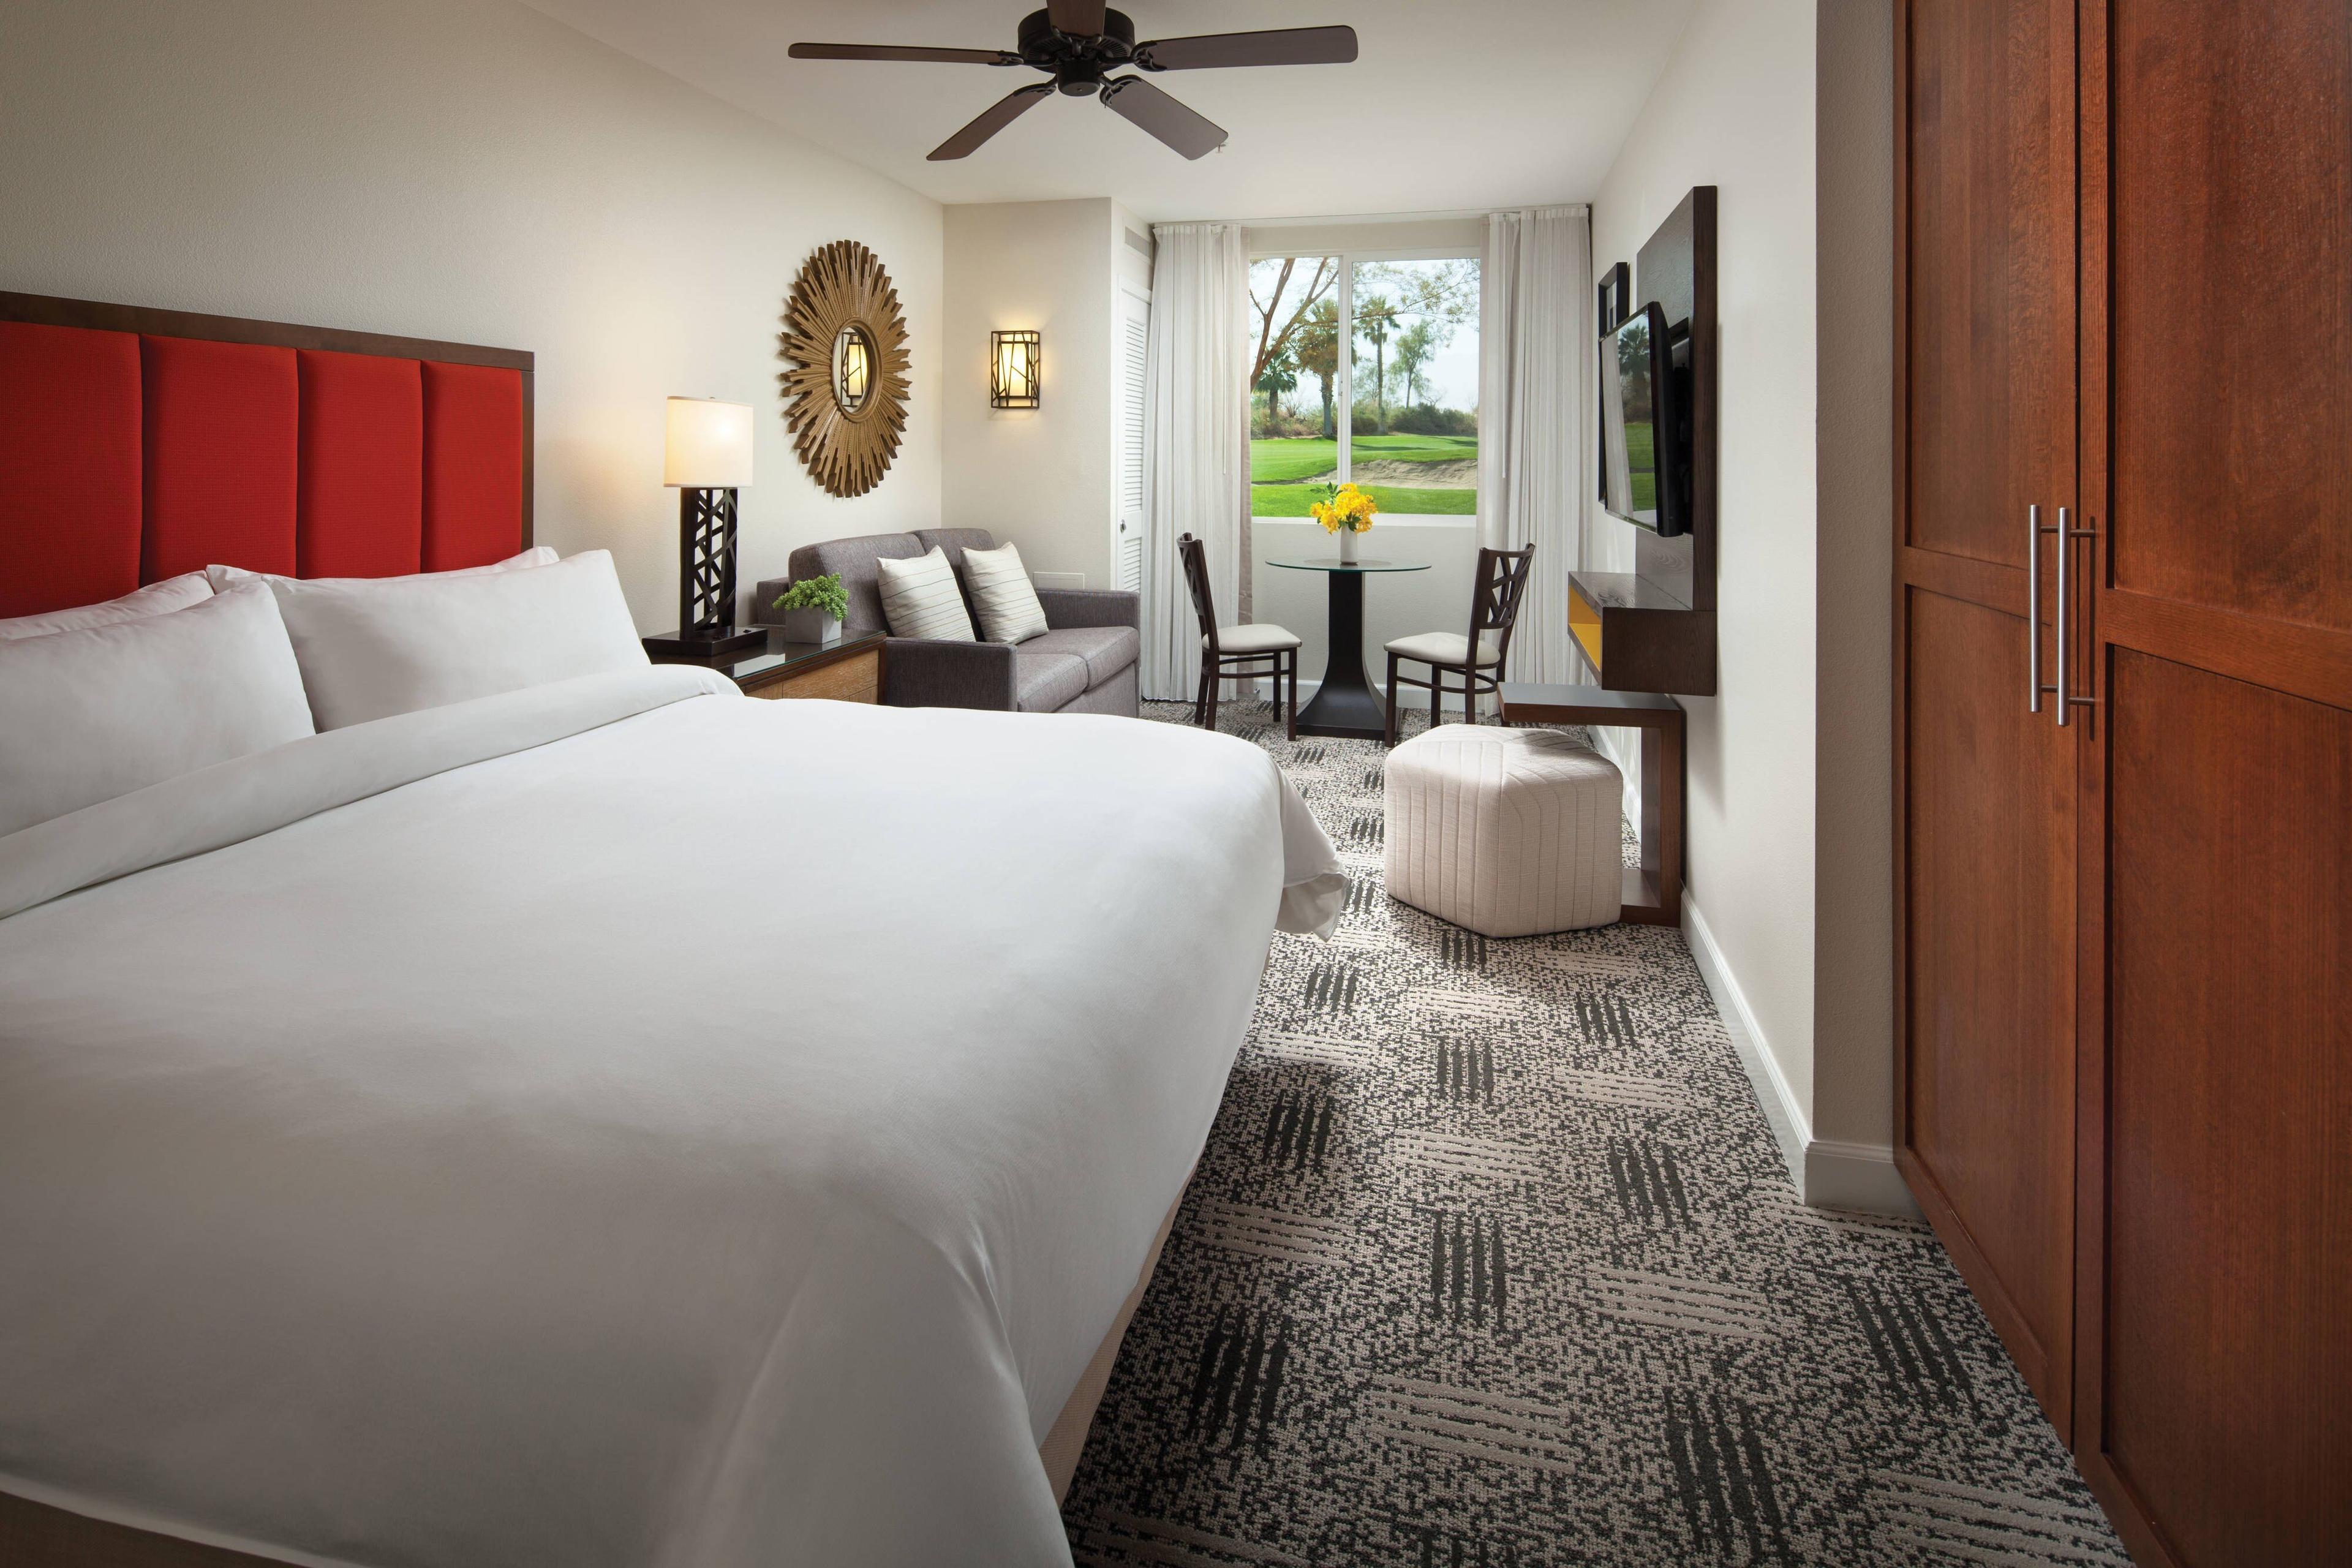 The comfortable guest room features a king-size bed, a sofa bed, table seating for two and a kitchenette with mini-refrigerator, microwave and dishes. You will not find a balcony but step outside your door to enjoy the Palm Desert Experience.